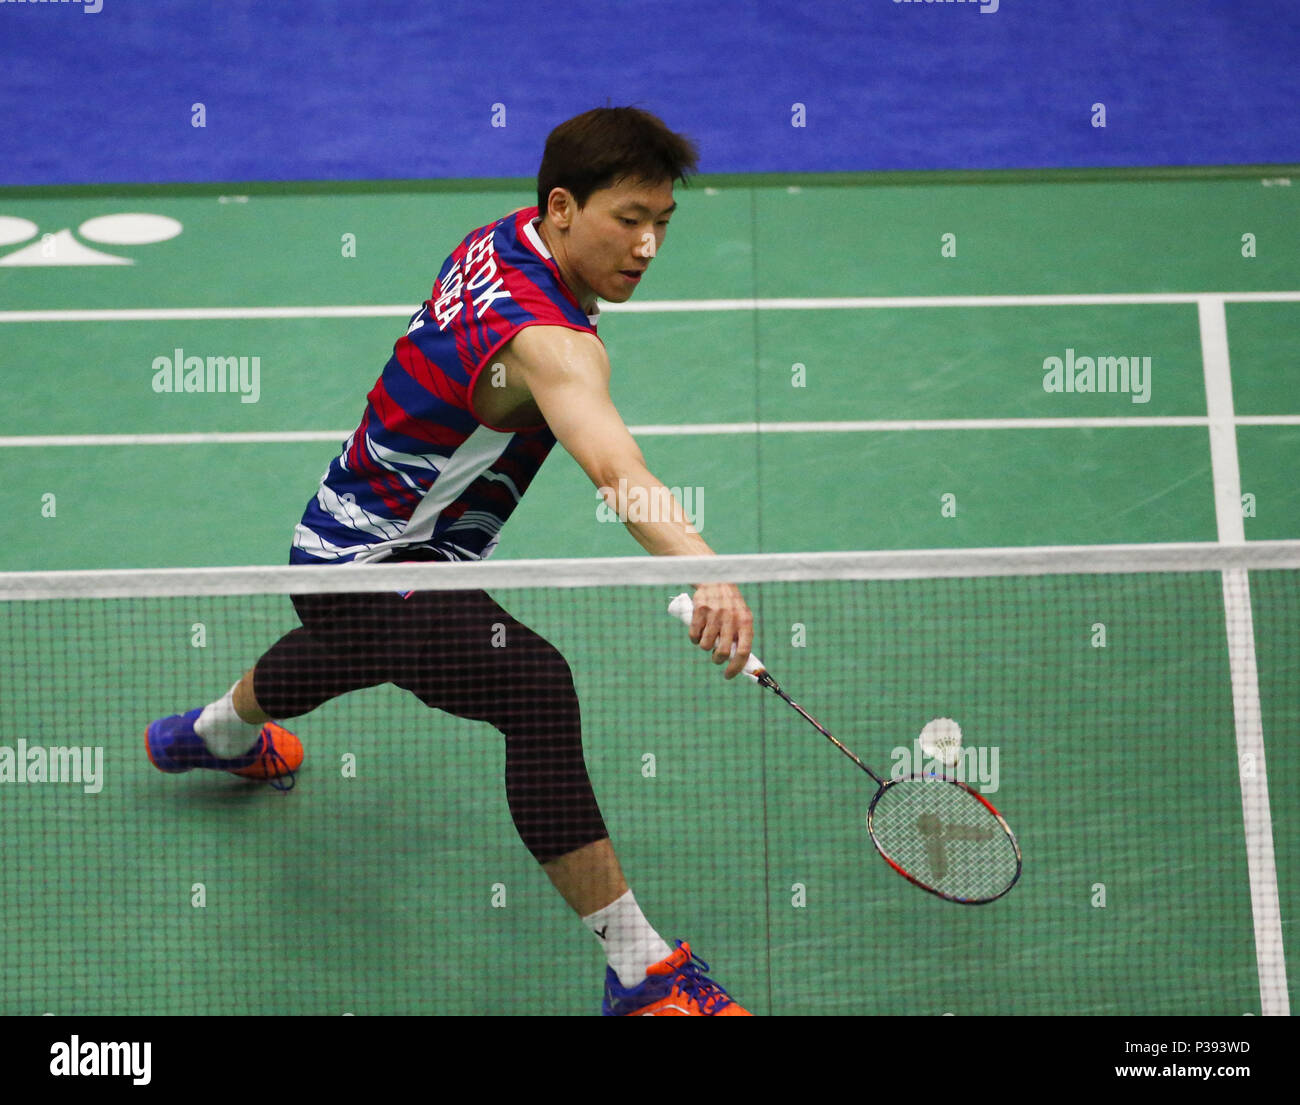 Los Angeles, California, USA. 17th June, 2018. Lee Dong Keun of Korea, competes with Mark Caljouw of Netherland, during the men's singles final match at the U.S. Open Badminton Championships in Fullerton, California, on June 17, 2018. Lee won 2-1. Credit: Ringo Chiu/ZUMA Wire/Alamy Live News Stock Photo